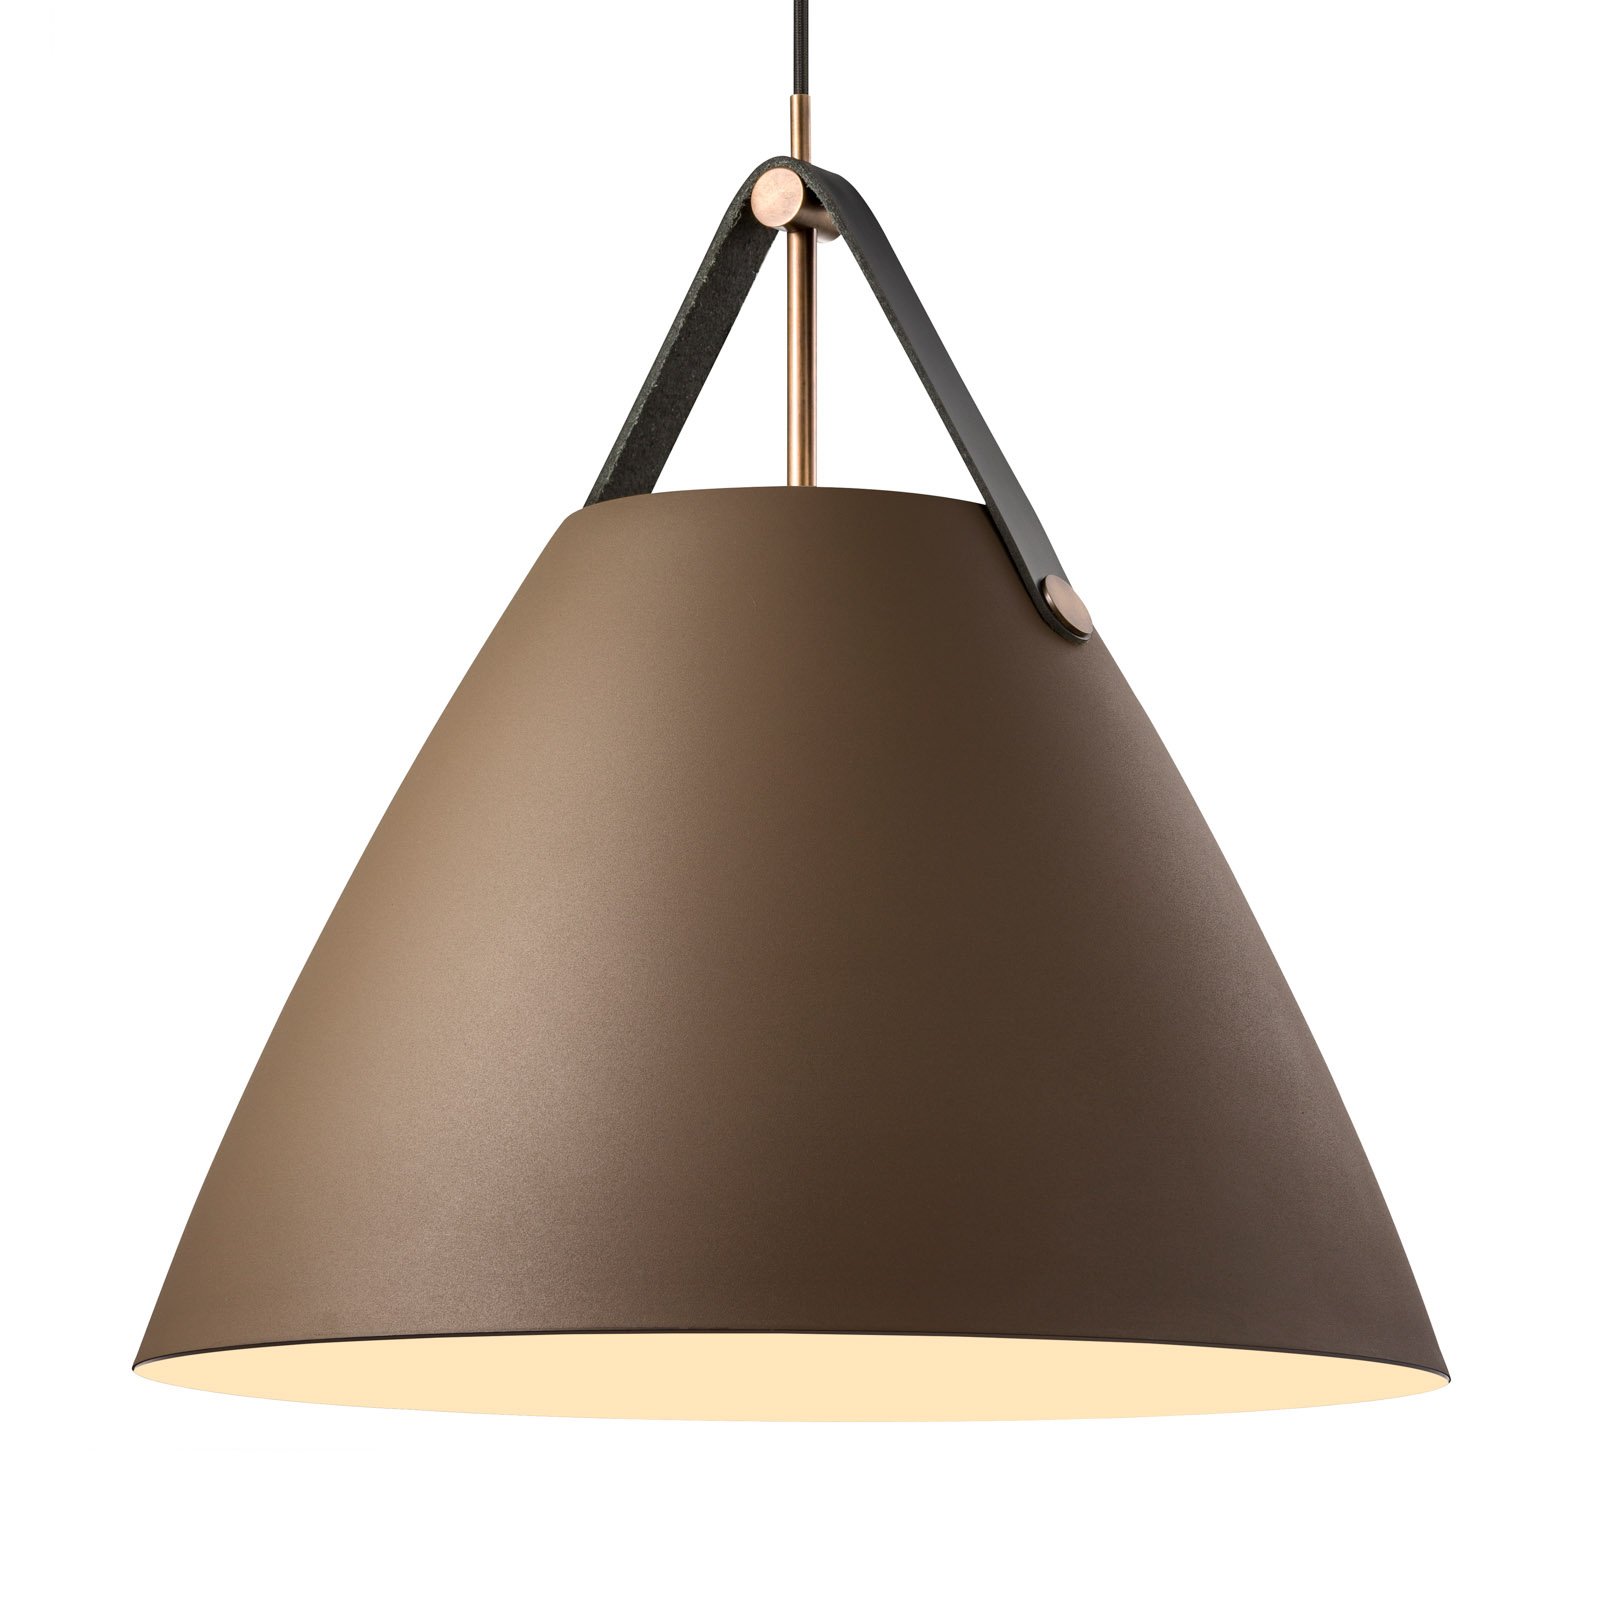 Hanging light Strap with metal shade beige, 48 cm